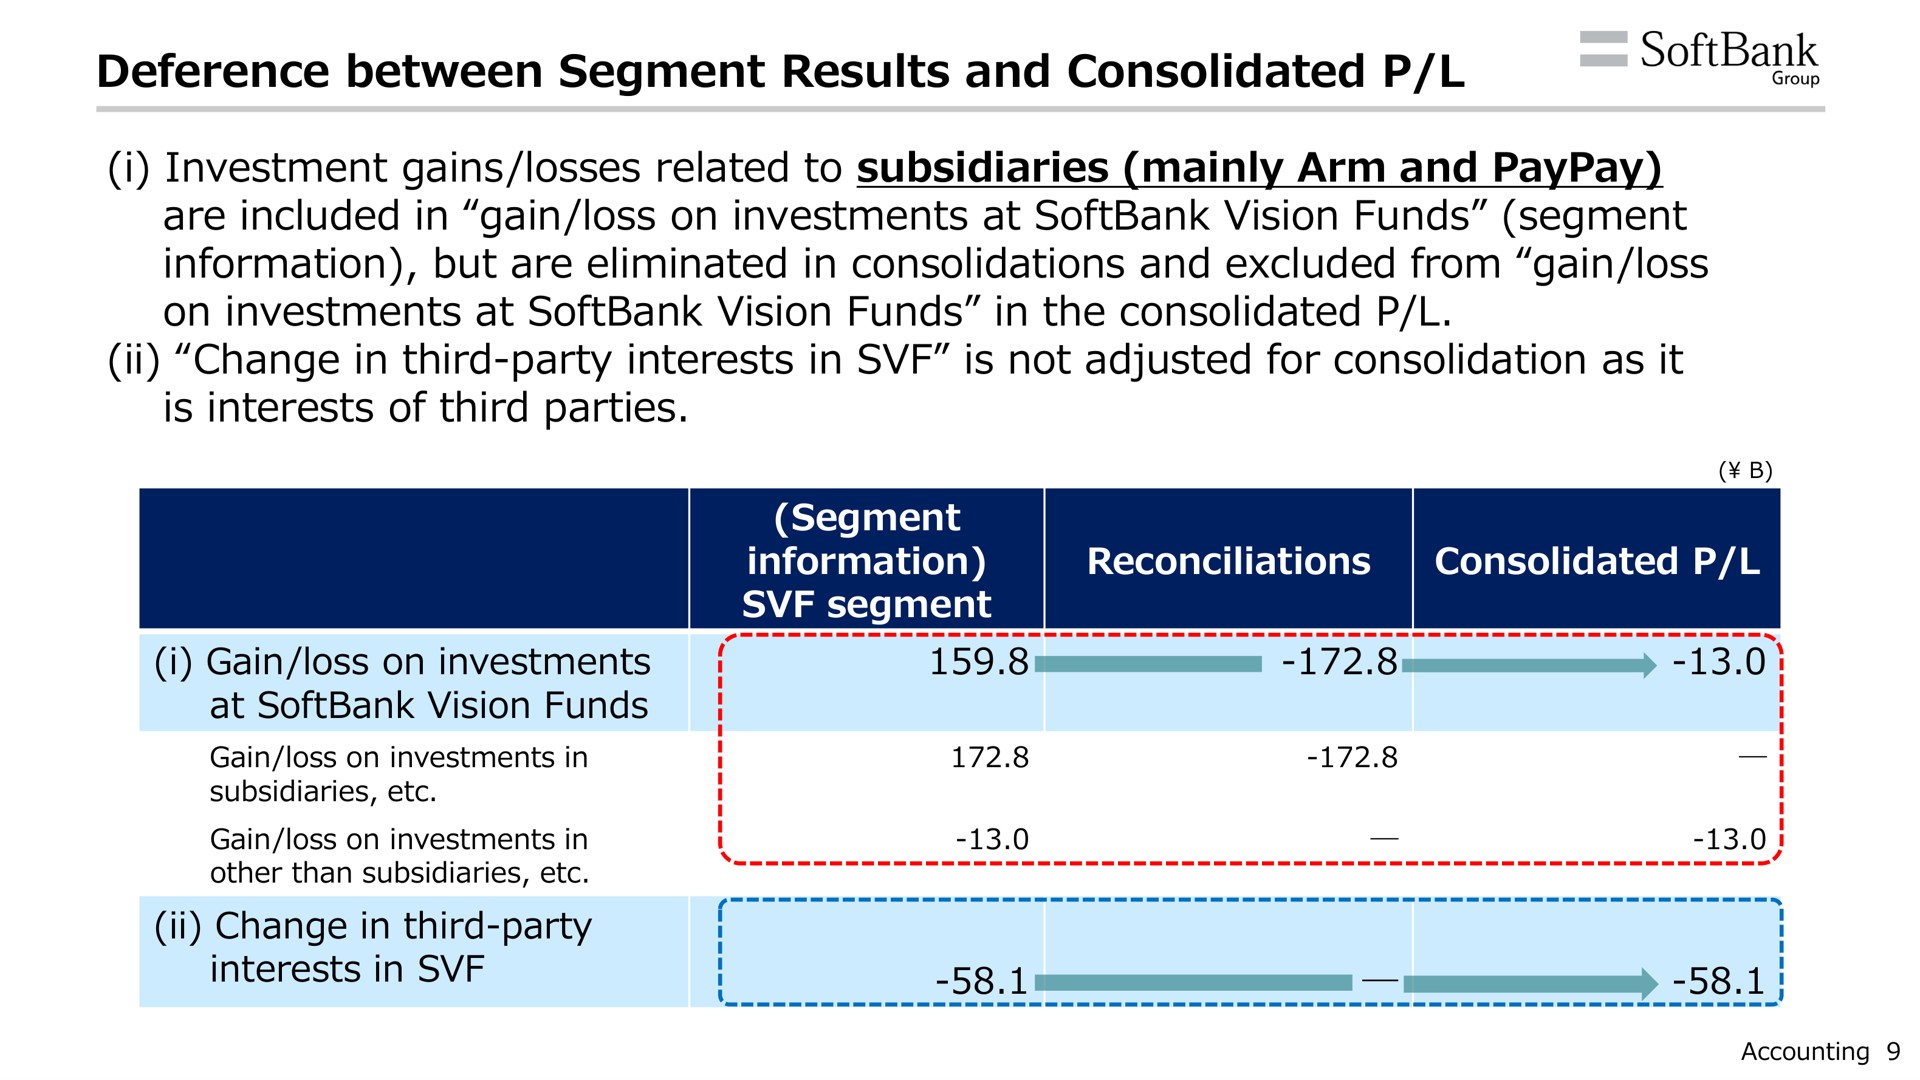 deference between segment results and consolidated i investment gains losses related to subsidiaries mainly arm and are included in gain loss on investments at vision funds segment information but are eliminated in consolidations and excluded from gain loss on investments at vision funds in the consolidated change in third party interests in is not adjusted for consolidation as it is interests of third parties roup | SoftBank